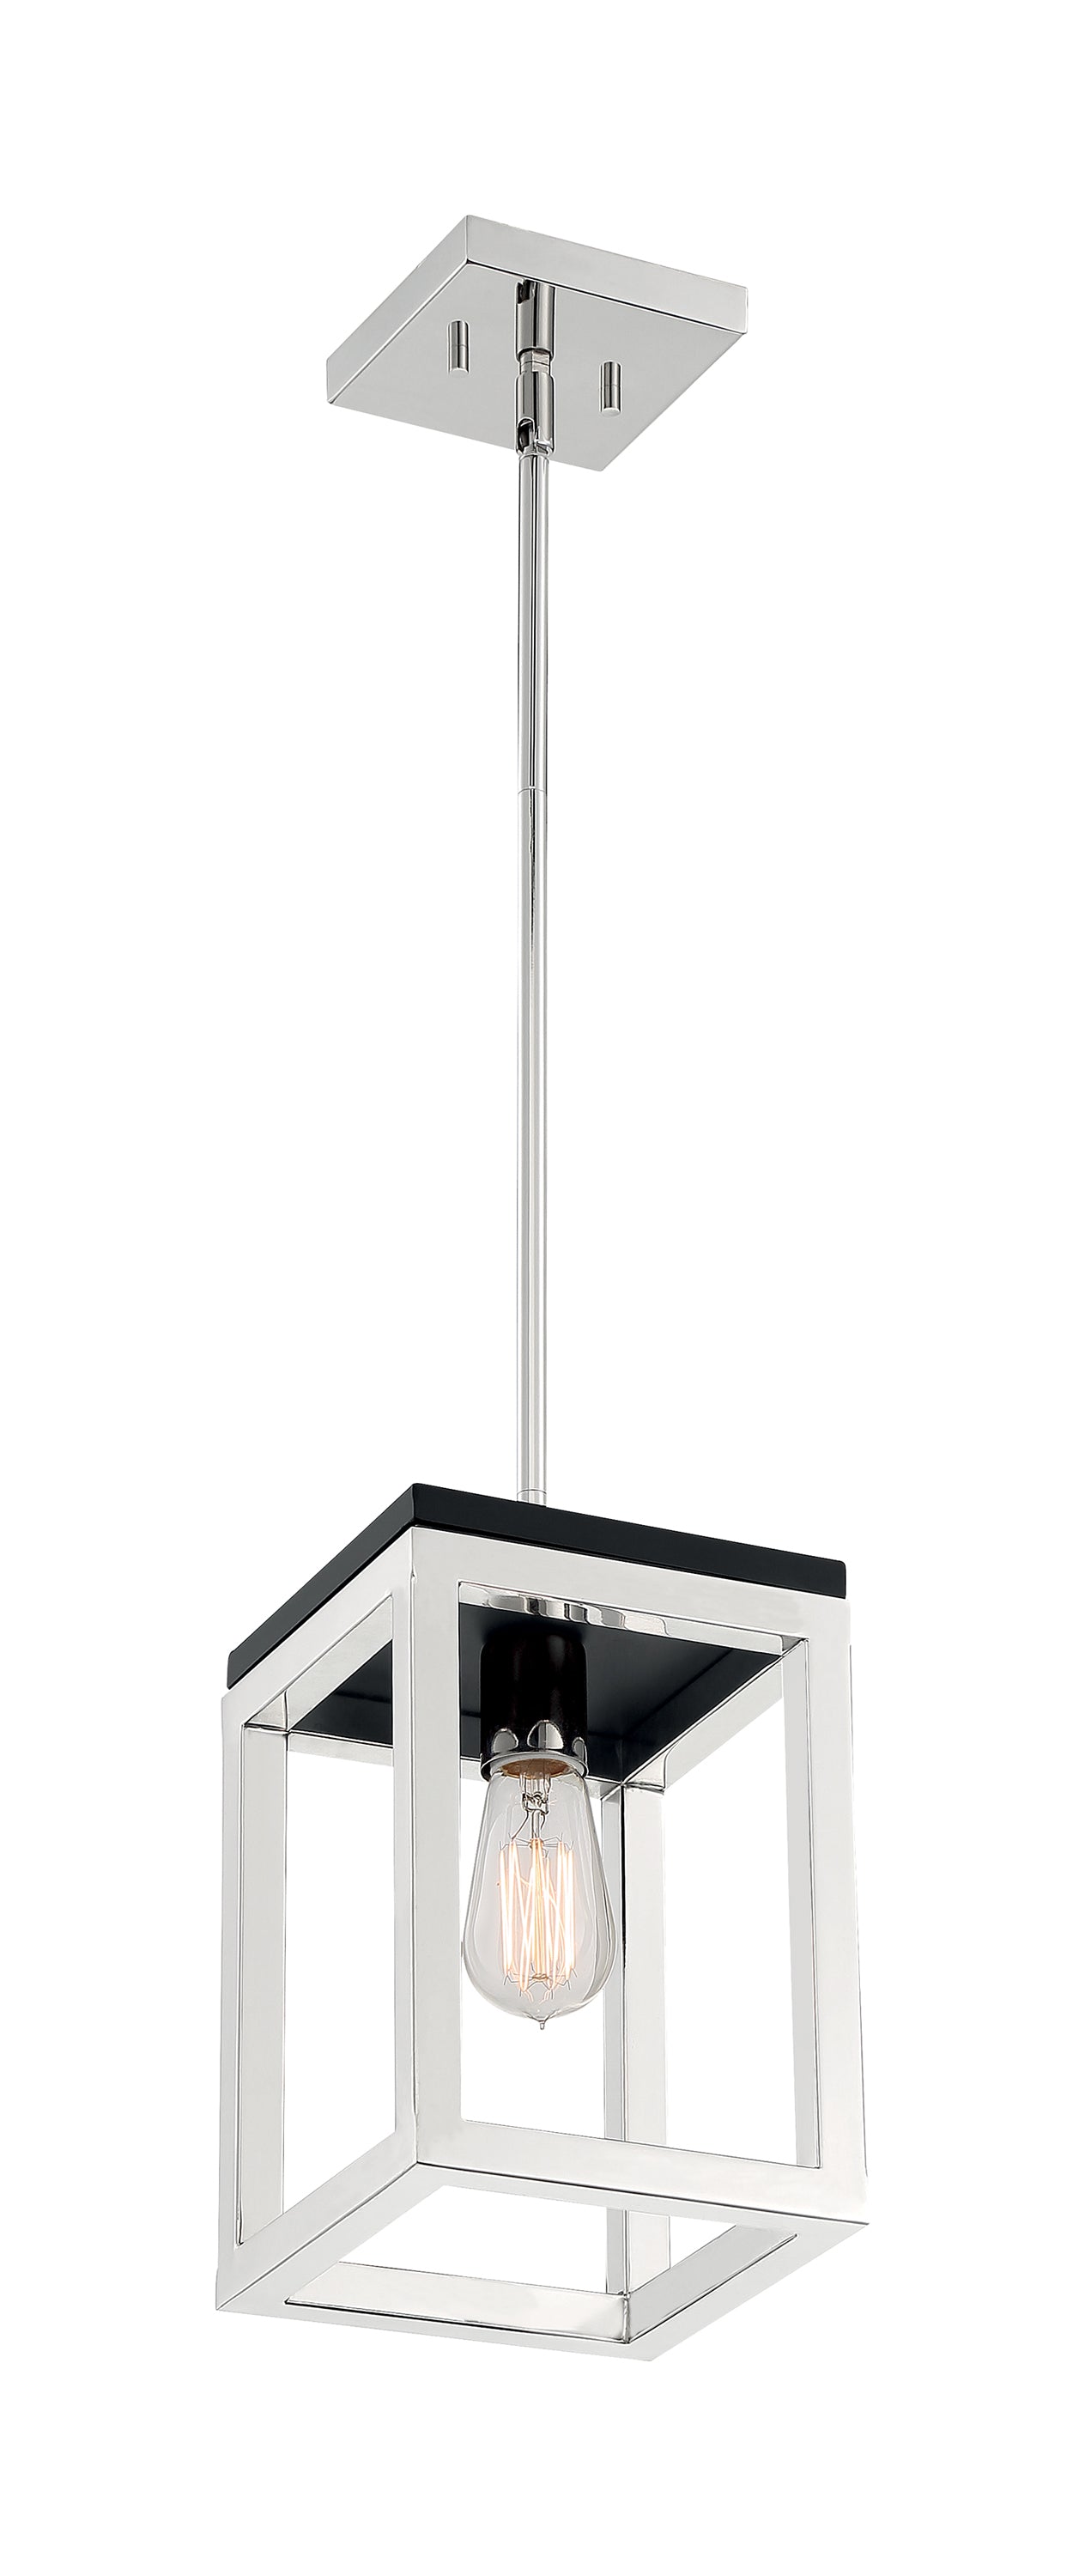 Cakewalk - 1 Light Pendant with Polished Nickel and Black Accents Finish